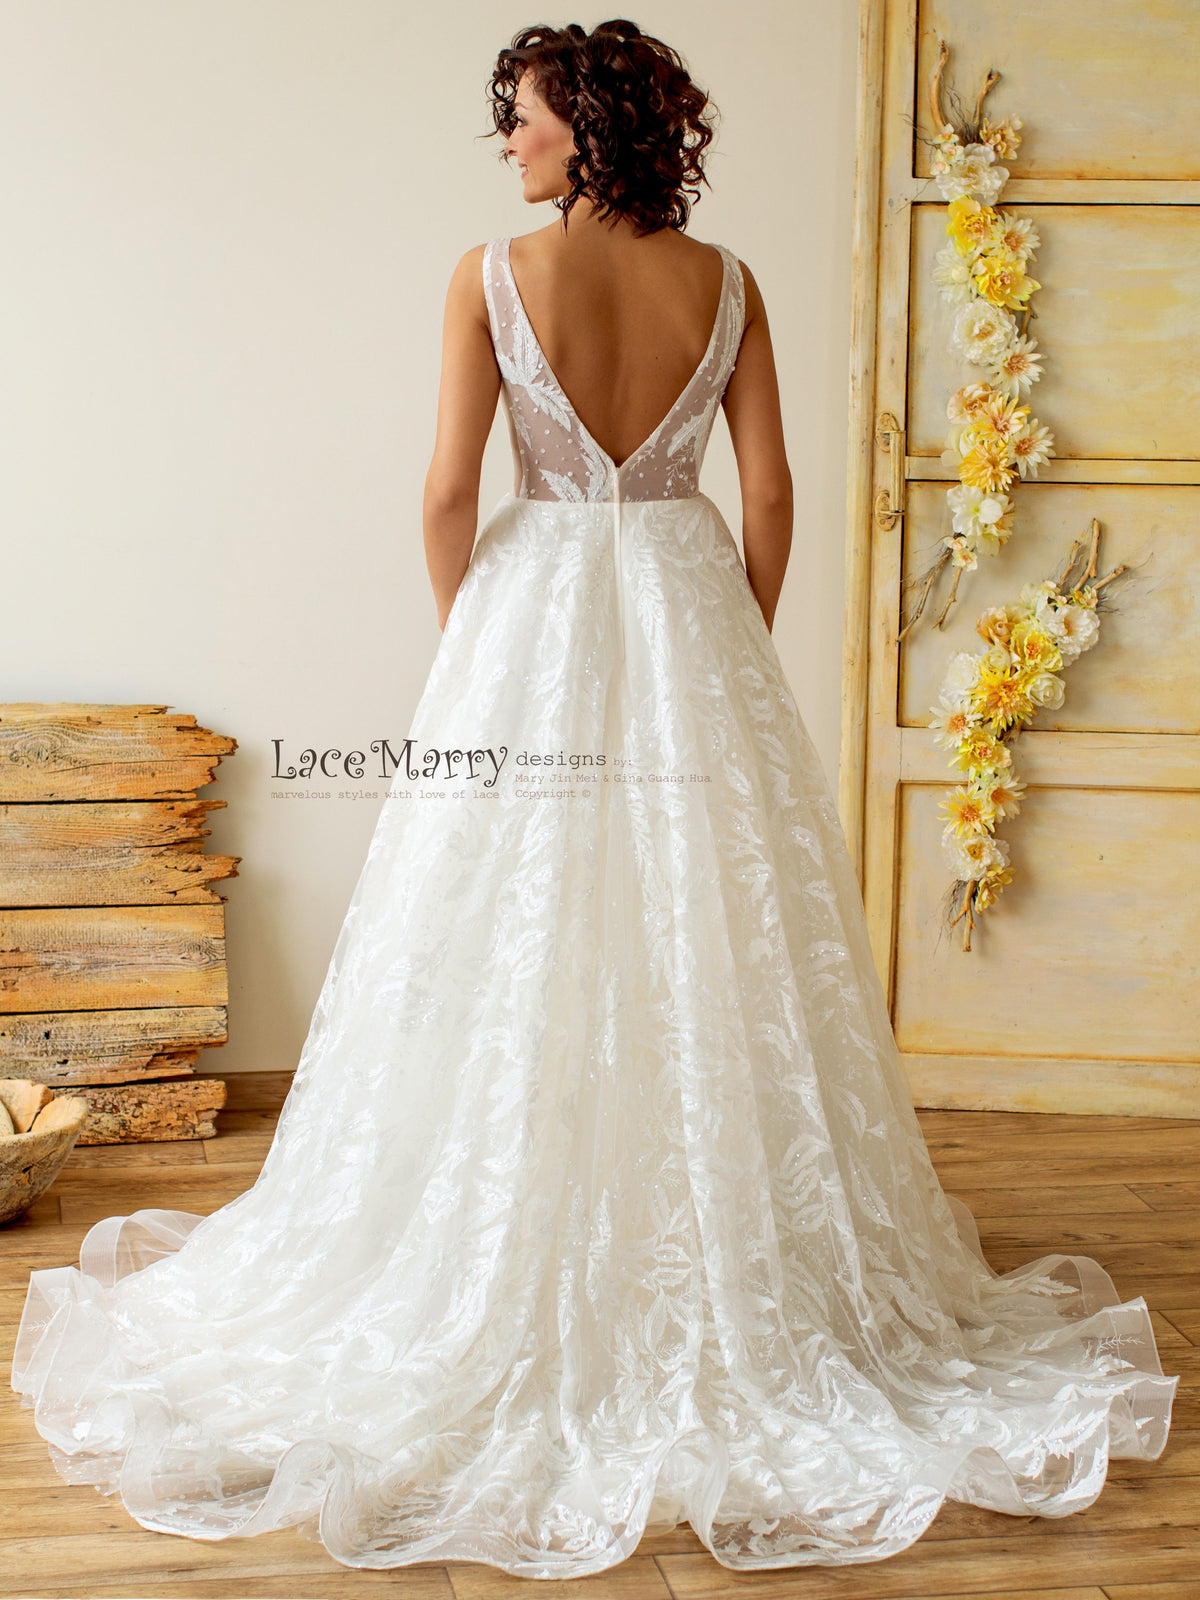 Sparkling Lace Wedding Dress with Train